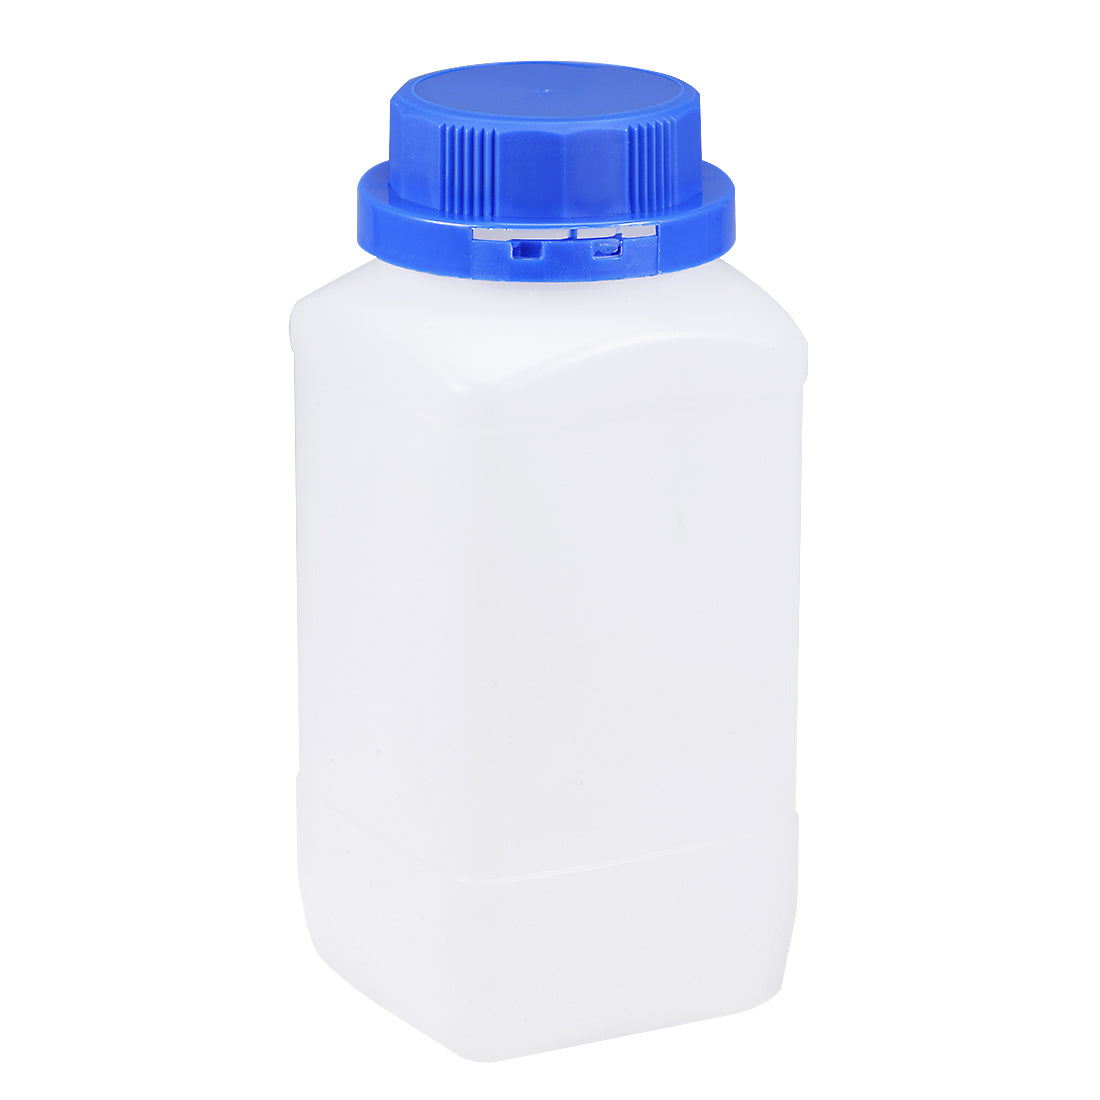 uxcell Uxcell Plastic Lab Chemical Reagent Bottle 1000ml/34oz Wide Mouth Sample Sealing Liquid Storage Container Blue